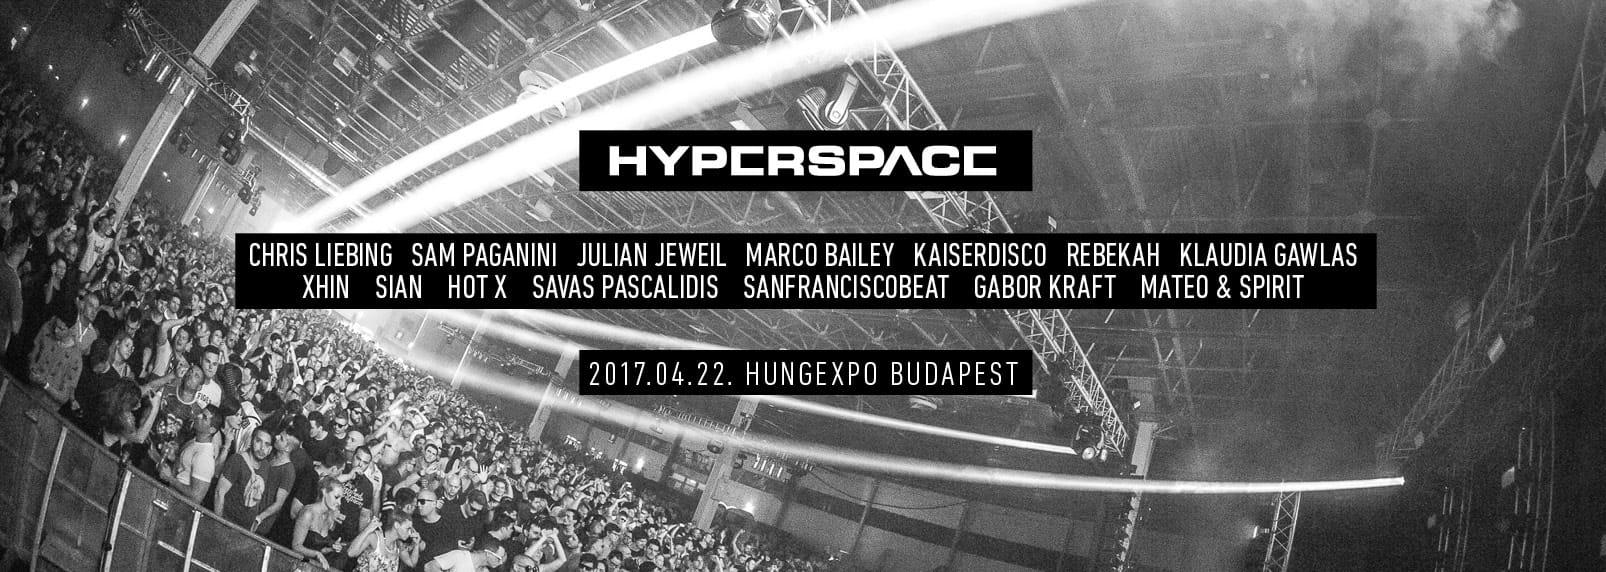 Hyperspace Techno Festival 2017, Hungexpo, 22 April